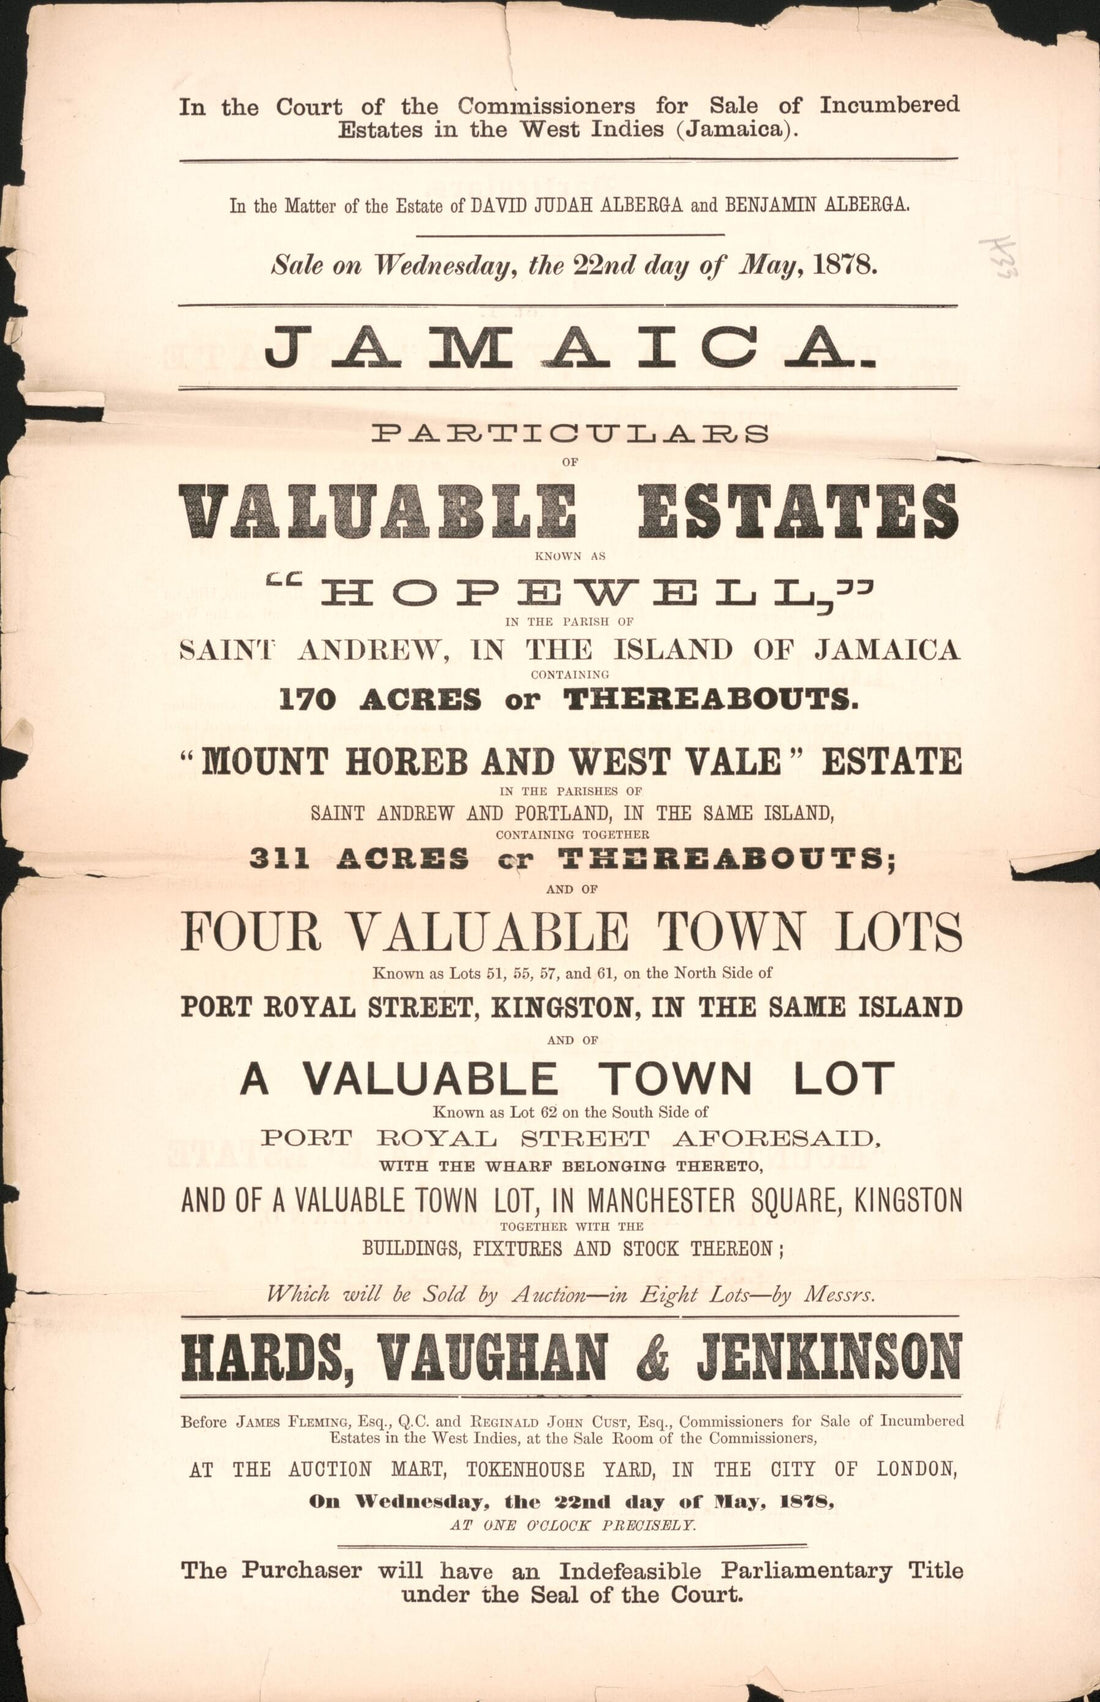 This old map of Jamaica, Particulars of Valuable Estates : Known As Hopewell, In the Parish of Saint Andrew, In the Island of Jamaica Containing 170 Acres Or Thereabouts : Mount Horeb and West Vale Estate In the Parishes of Saint Andrew and Portland, In 